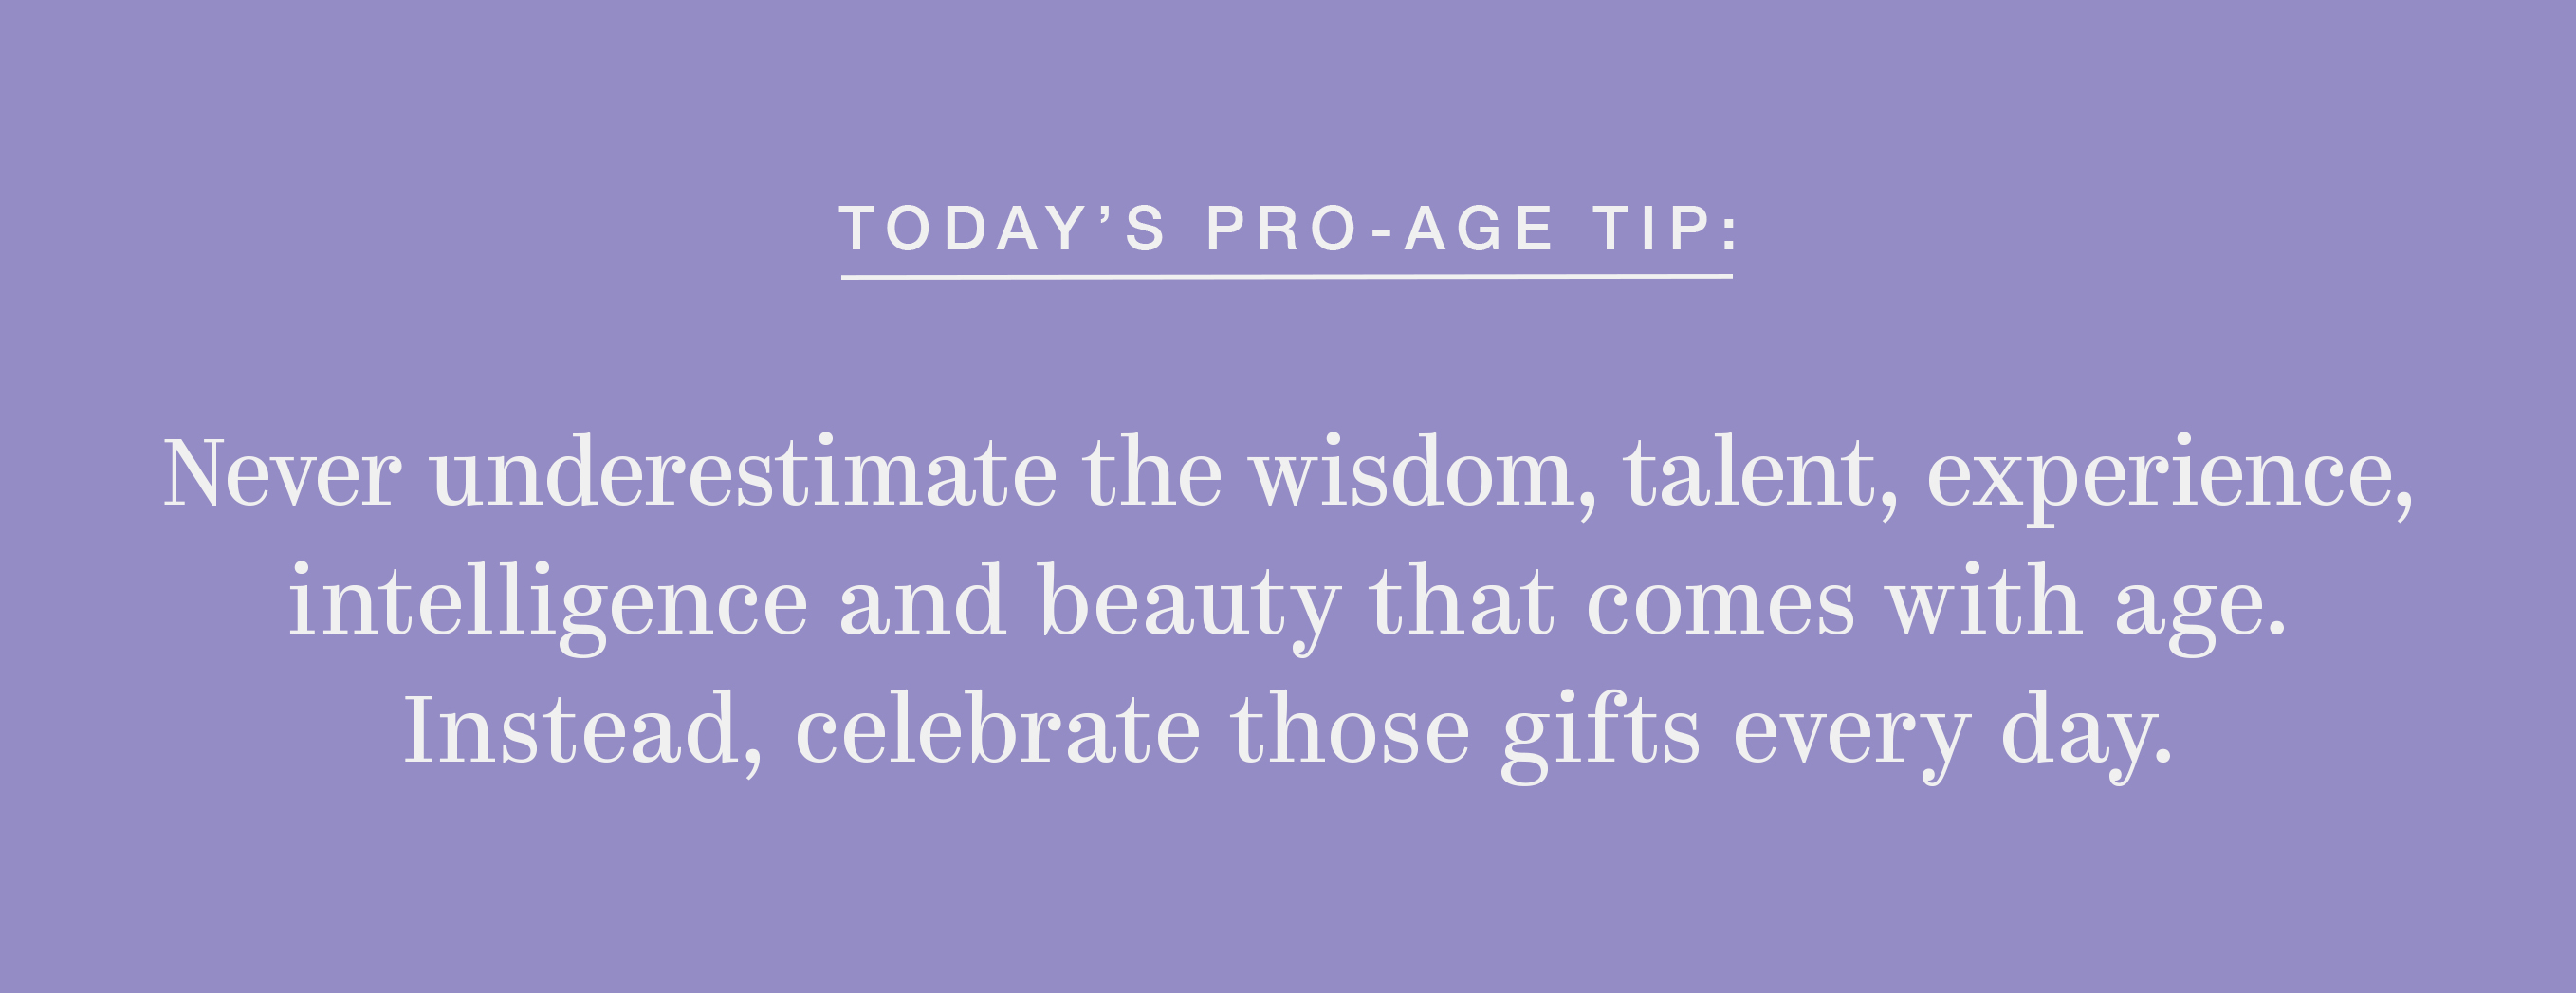 Never underestimate the wisdom, talent, experience, intelligence and beauty that comes with age. Instead, celebrate those gifts every day.